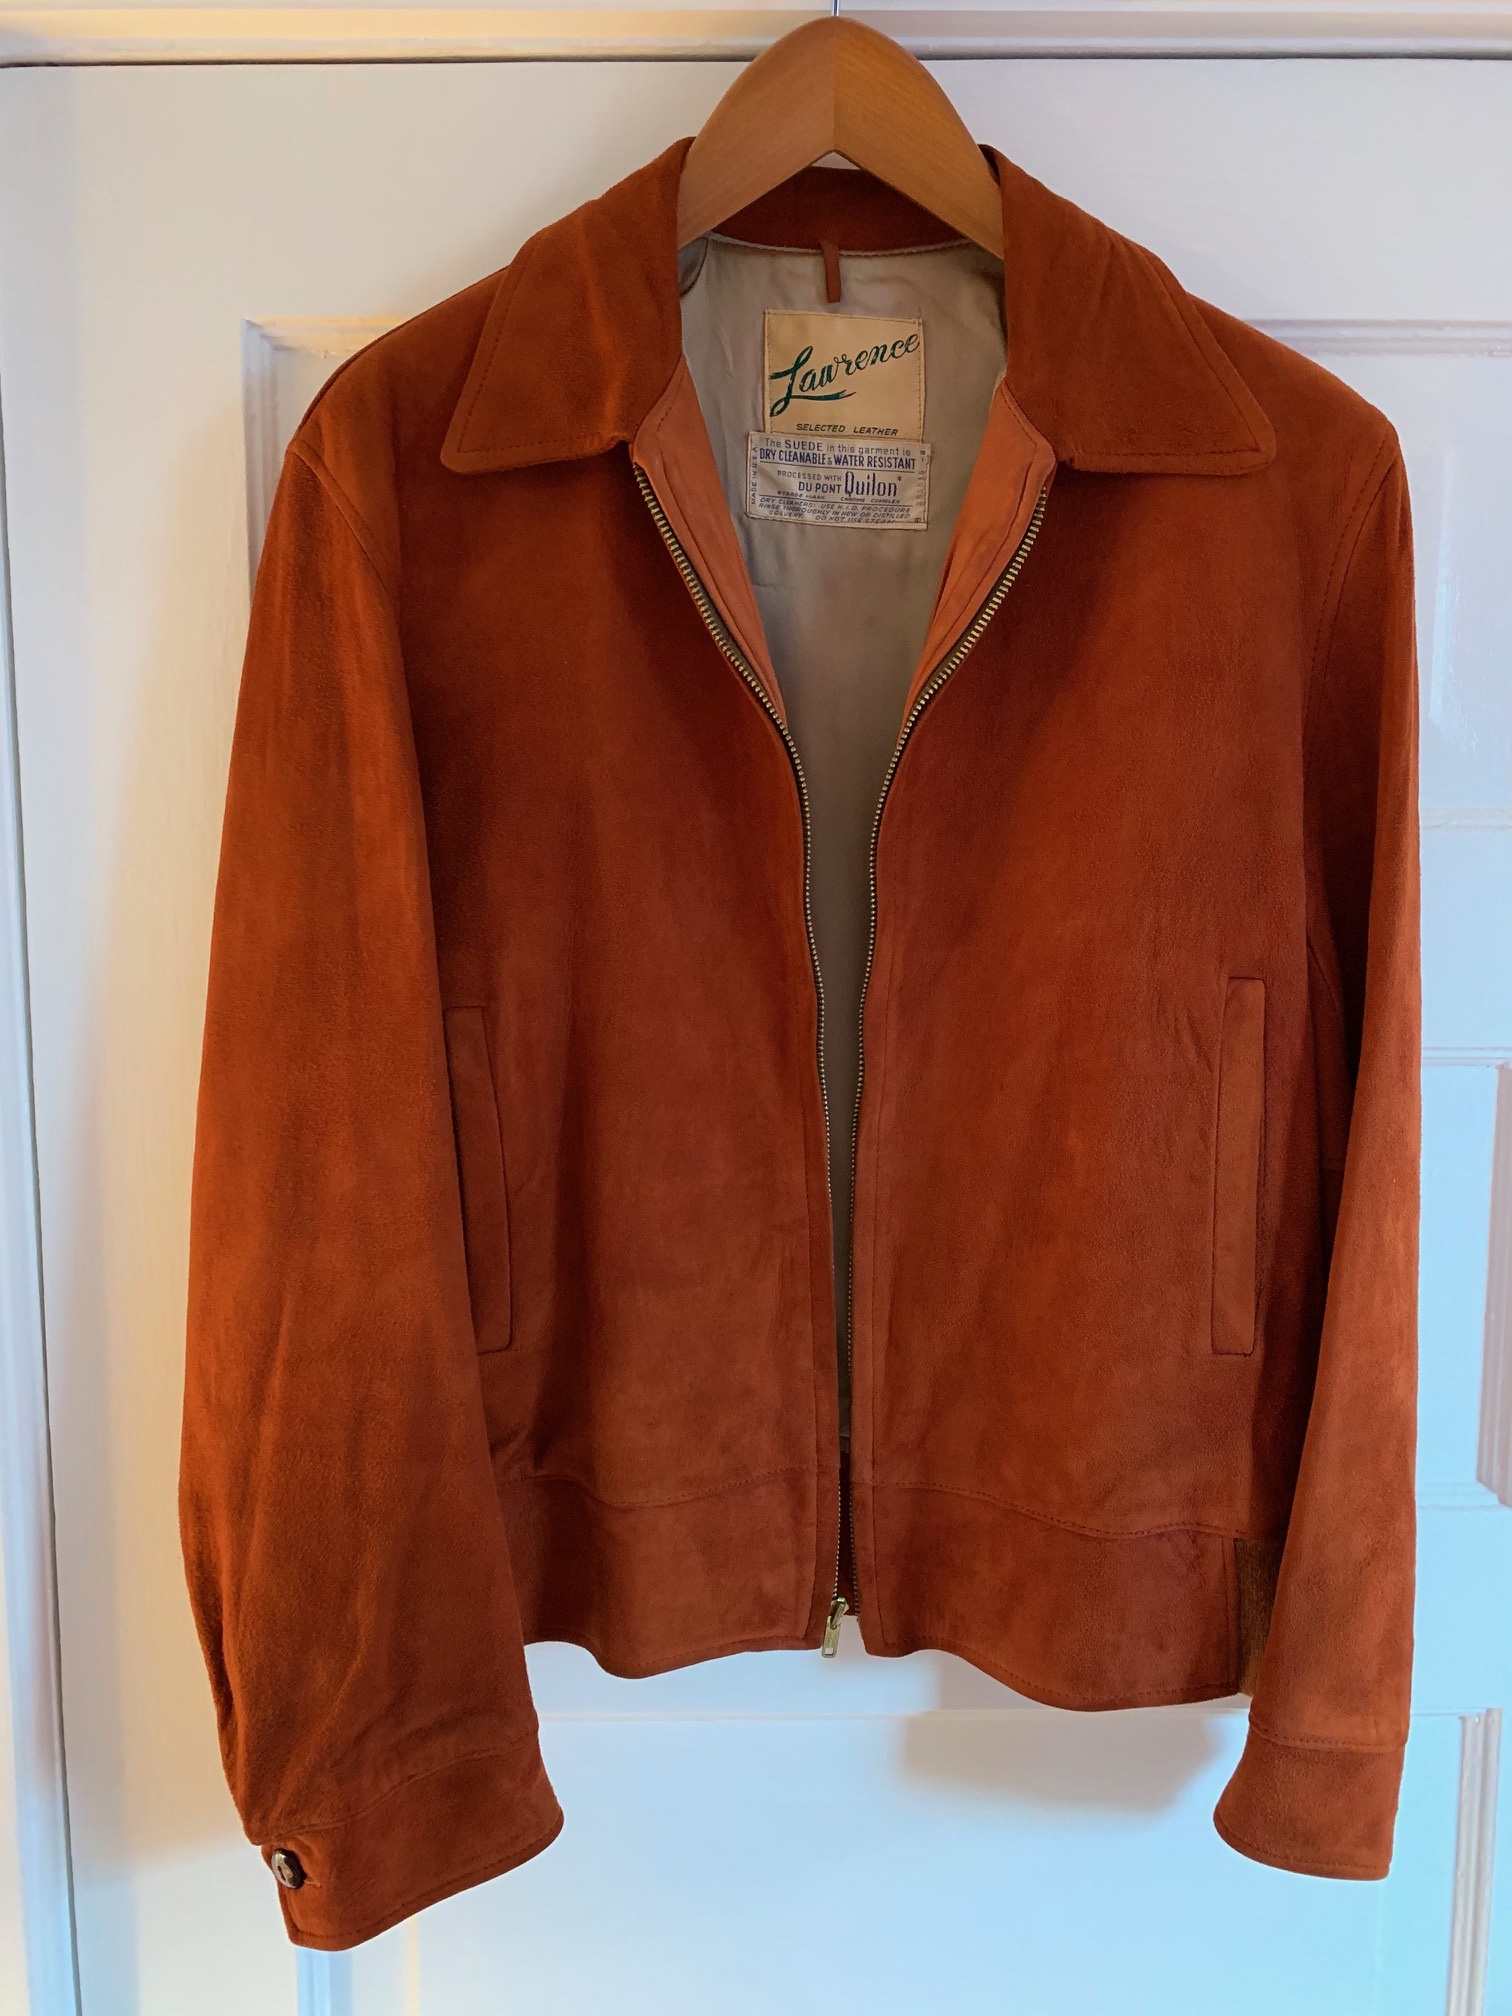 Rare, vintage 1950s Lawrence suede jacket -- MINT, 40/42 | The Fedora ...